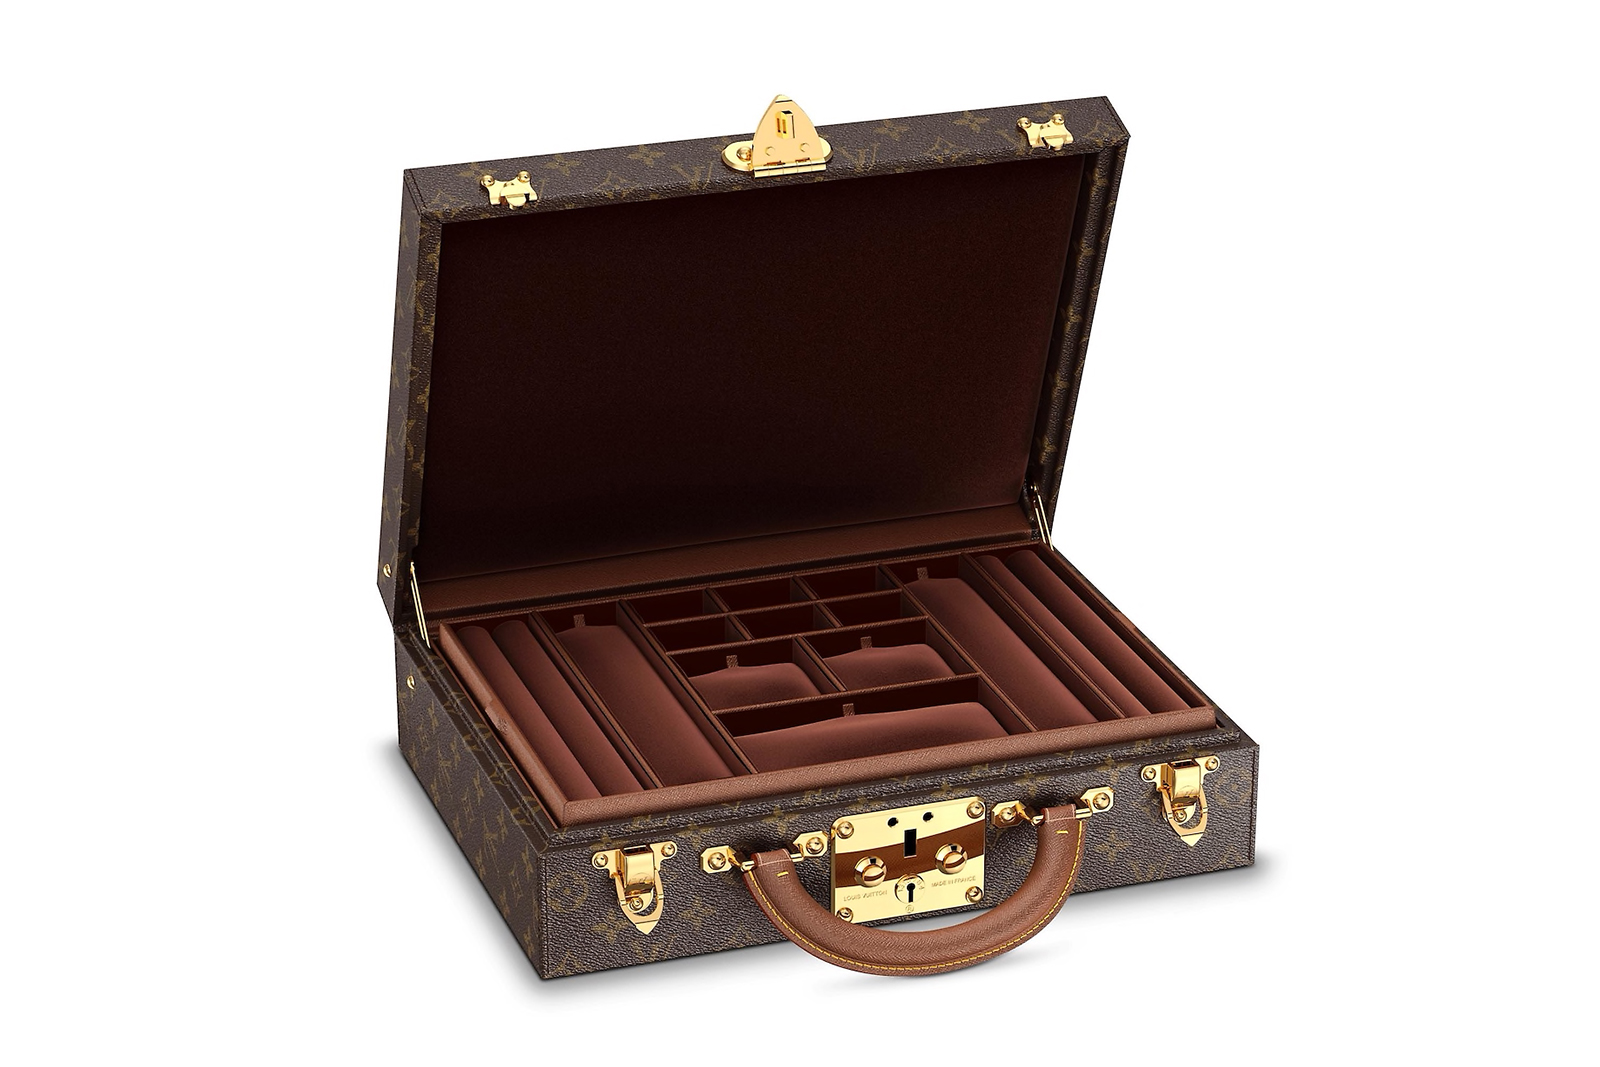 The Limited Edition Louis Vuitton Monogram Jewellery Box by